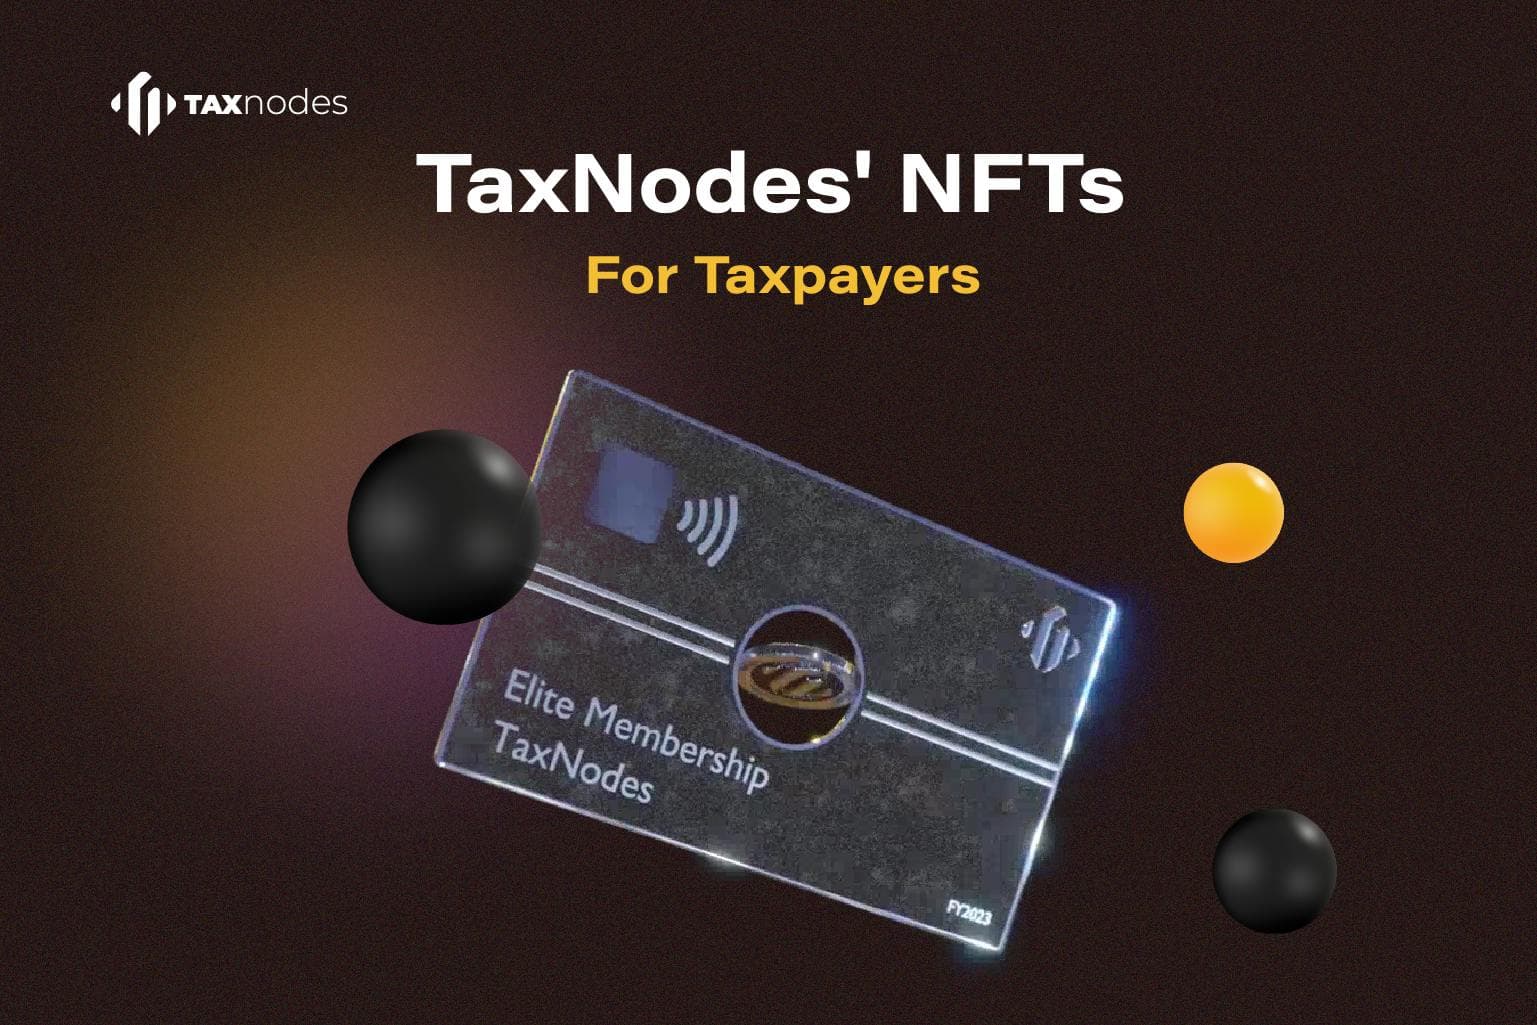 Unlocking a New Era: TaxNodes' NFTs Pave the Way to Web3 and Exclusive Benefits